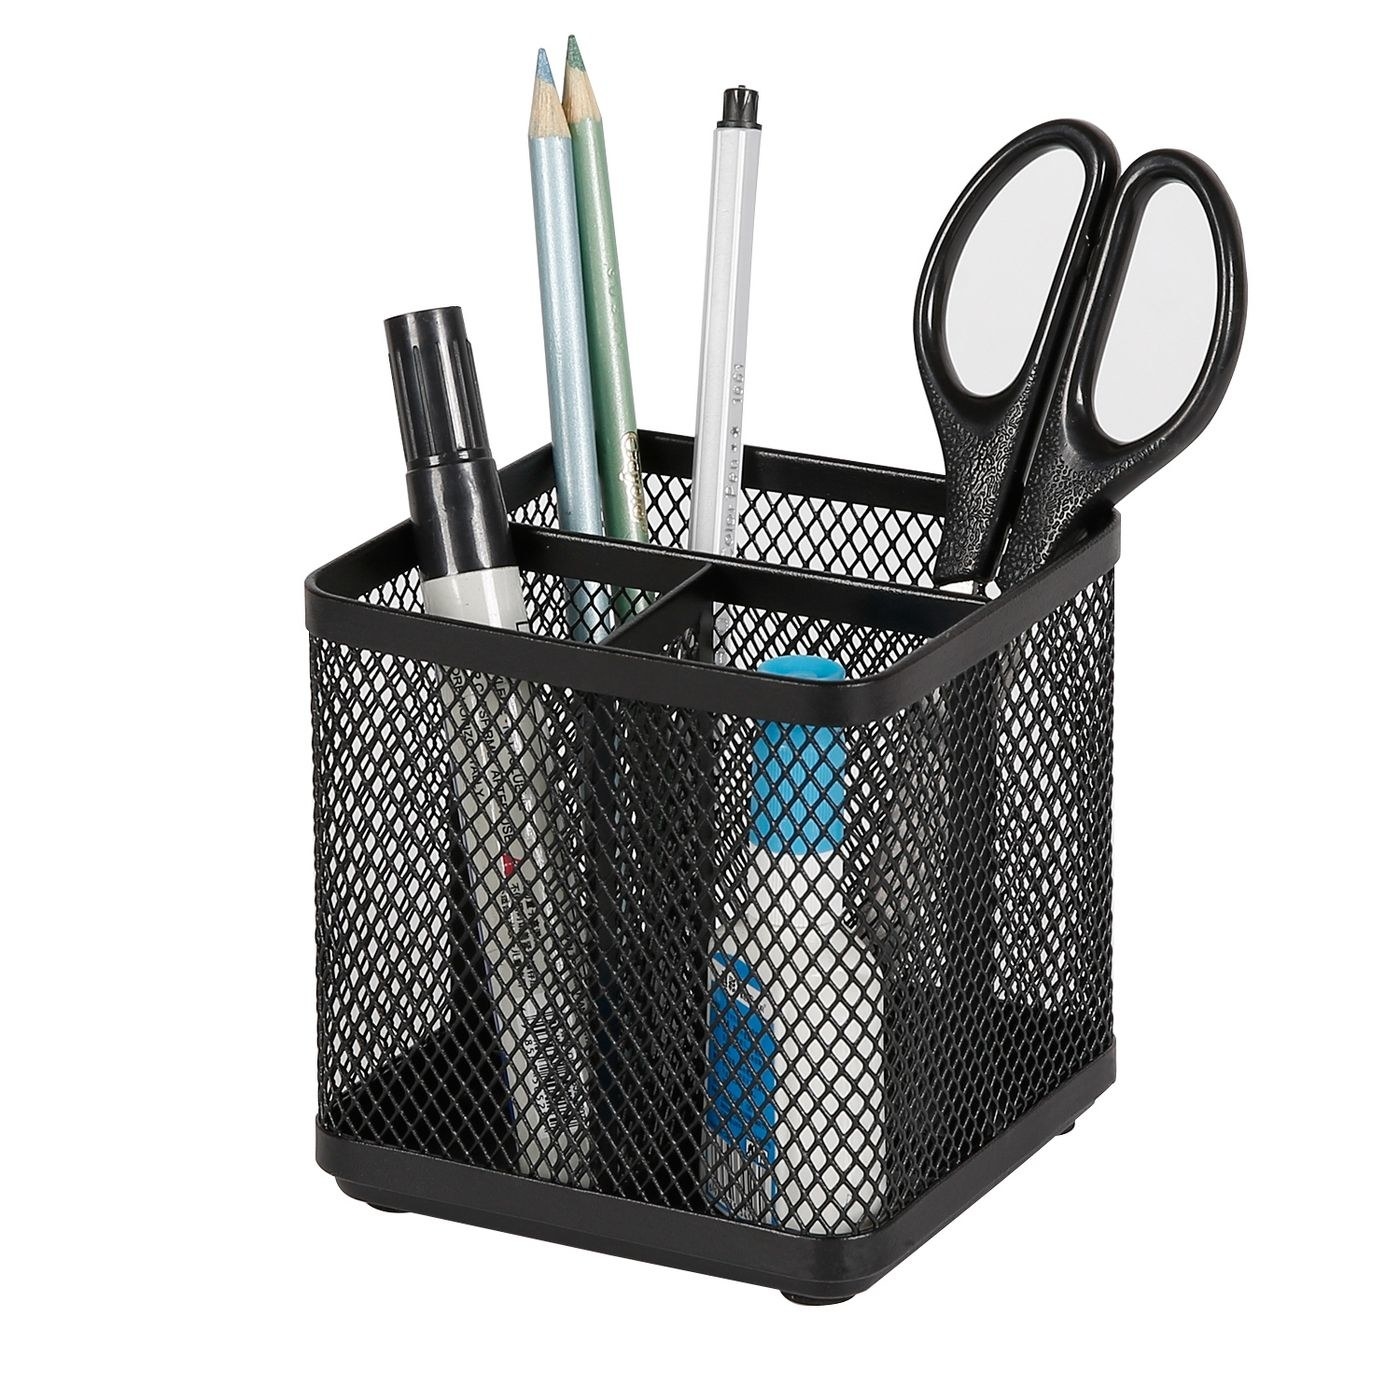 the black pen organizer with office supplies